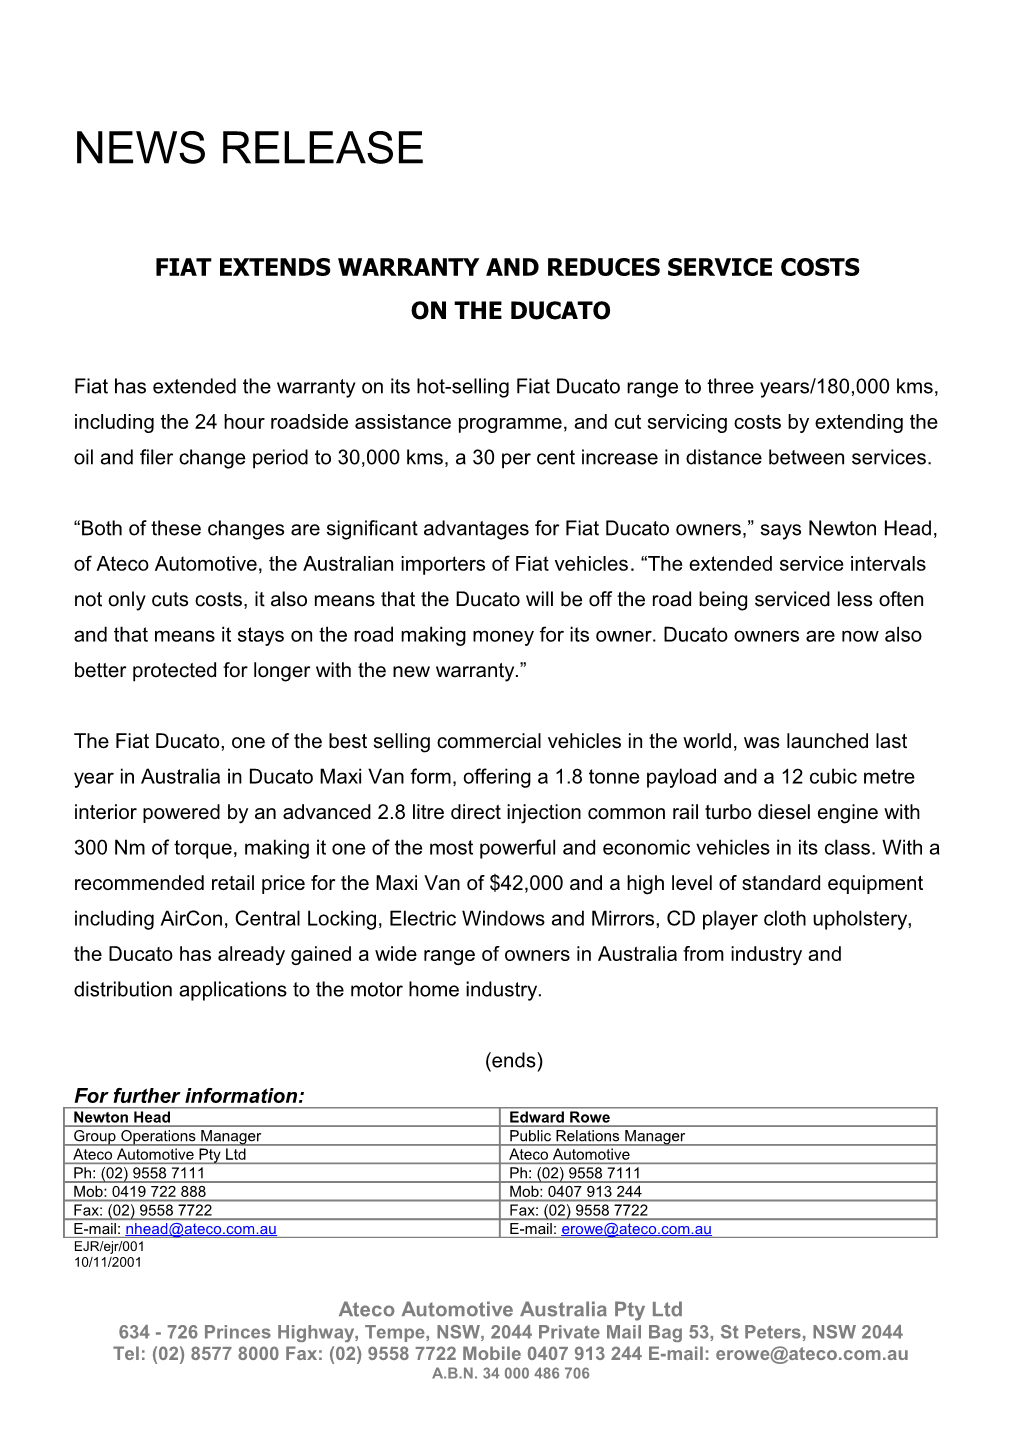 Fiat Extends Warranty and Reduces Service Costs